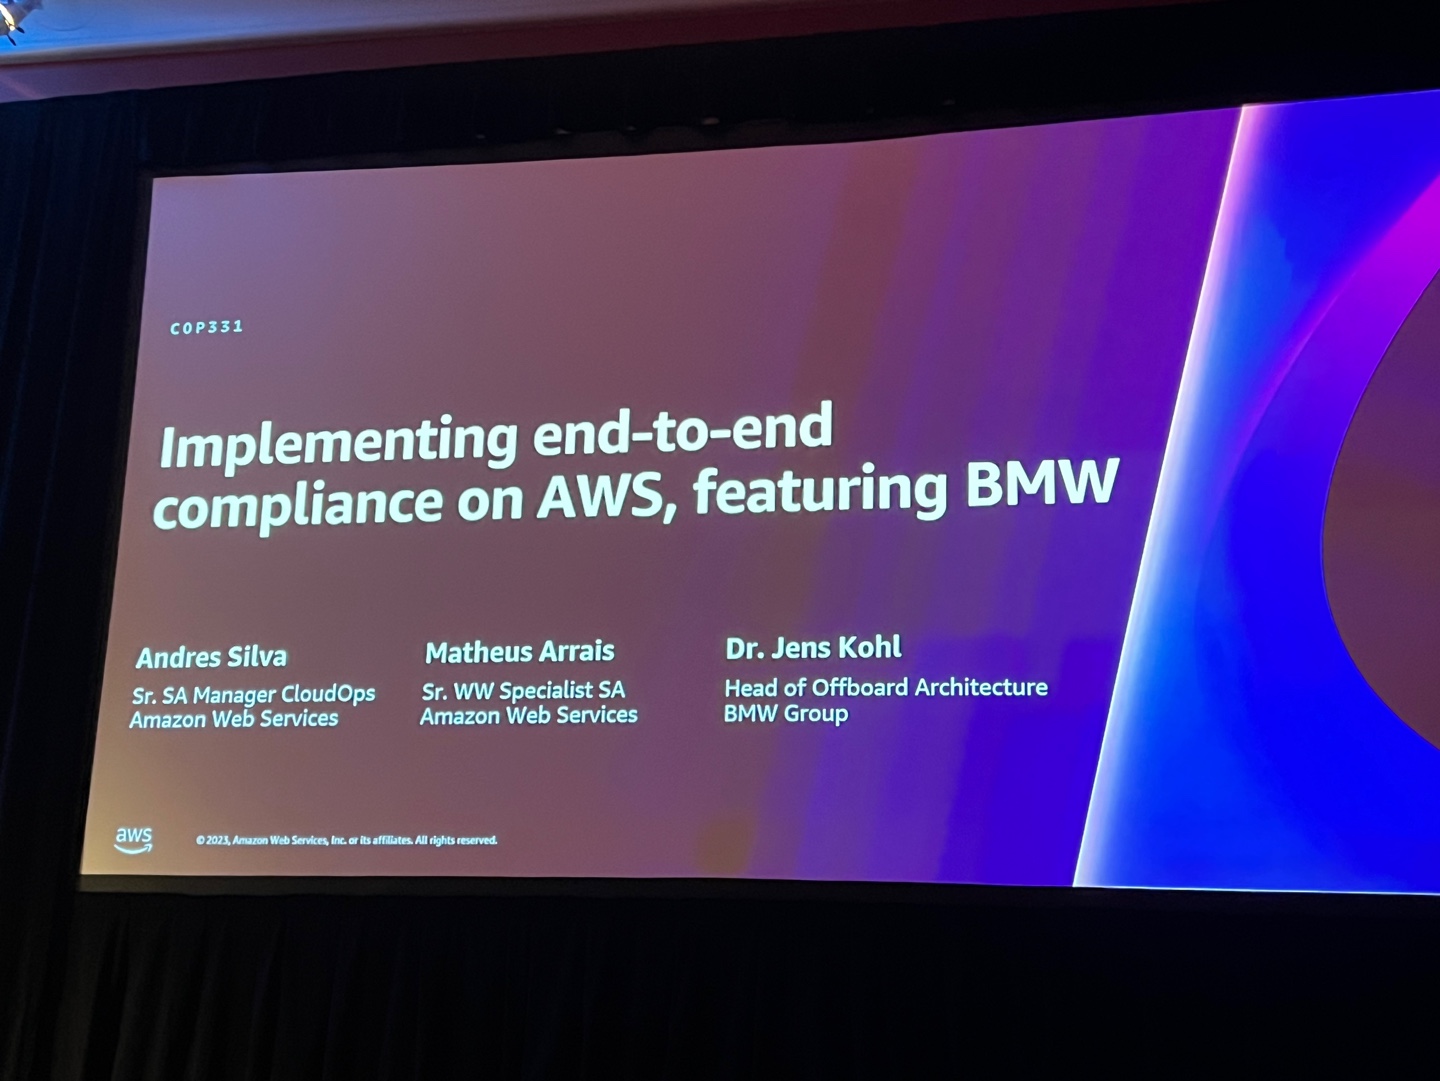 Implementing end-to-end compliance on AWS, featuring BMW